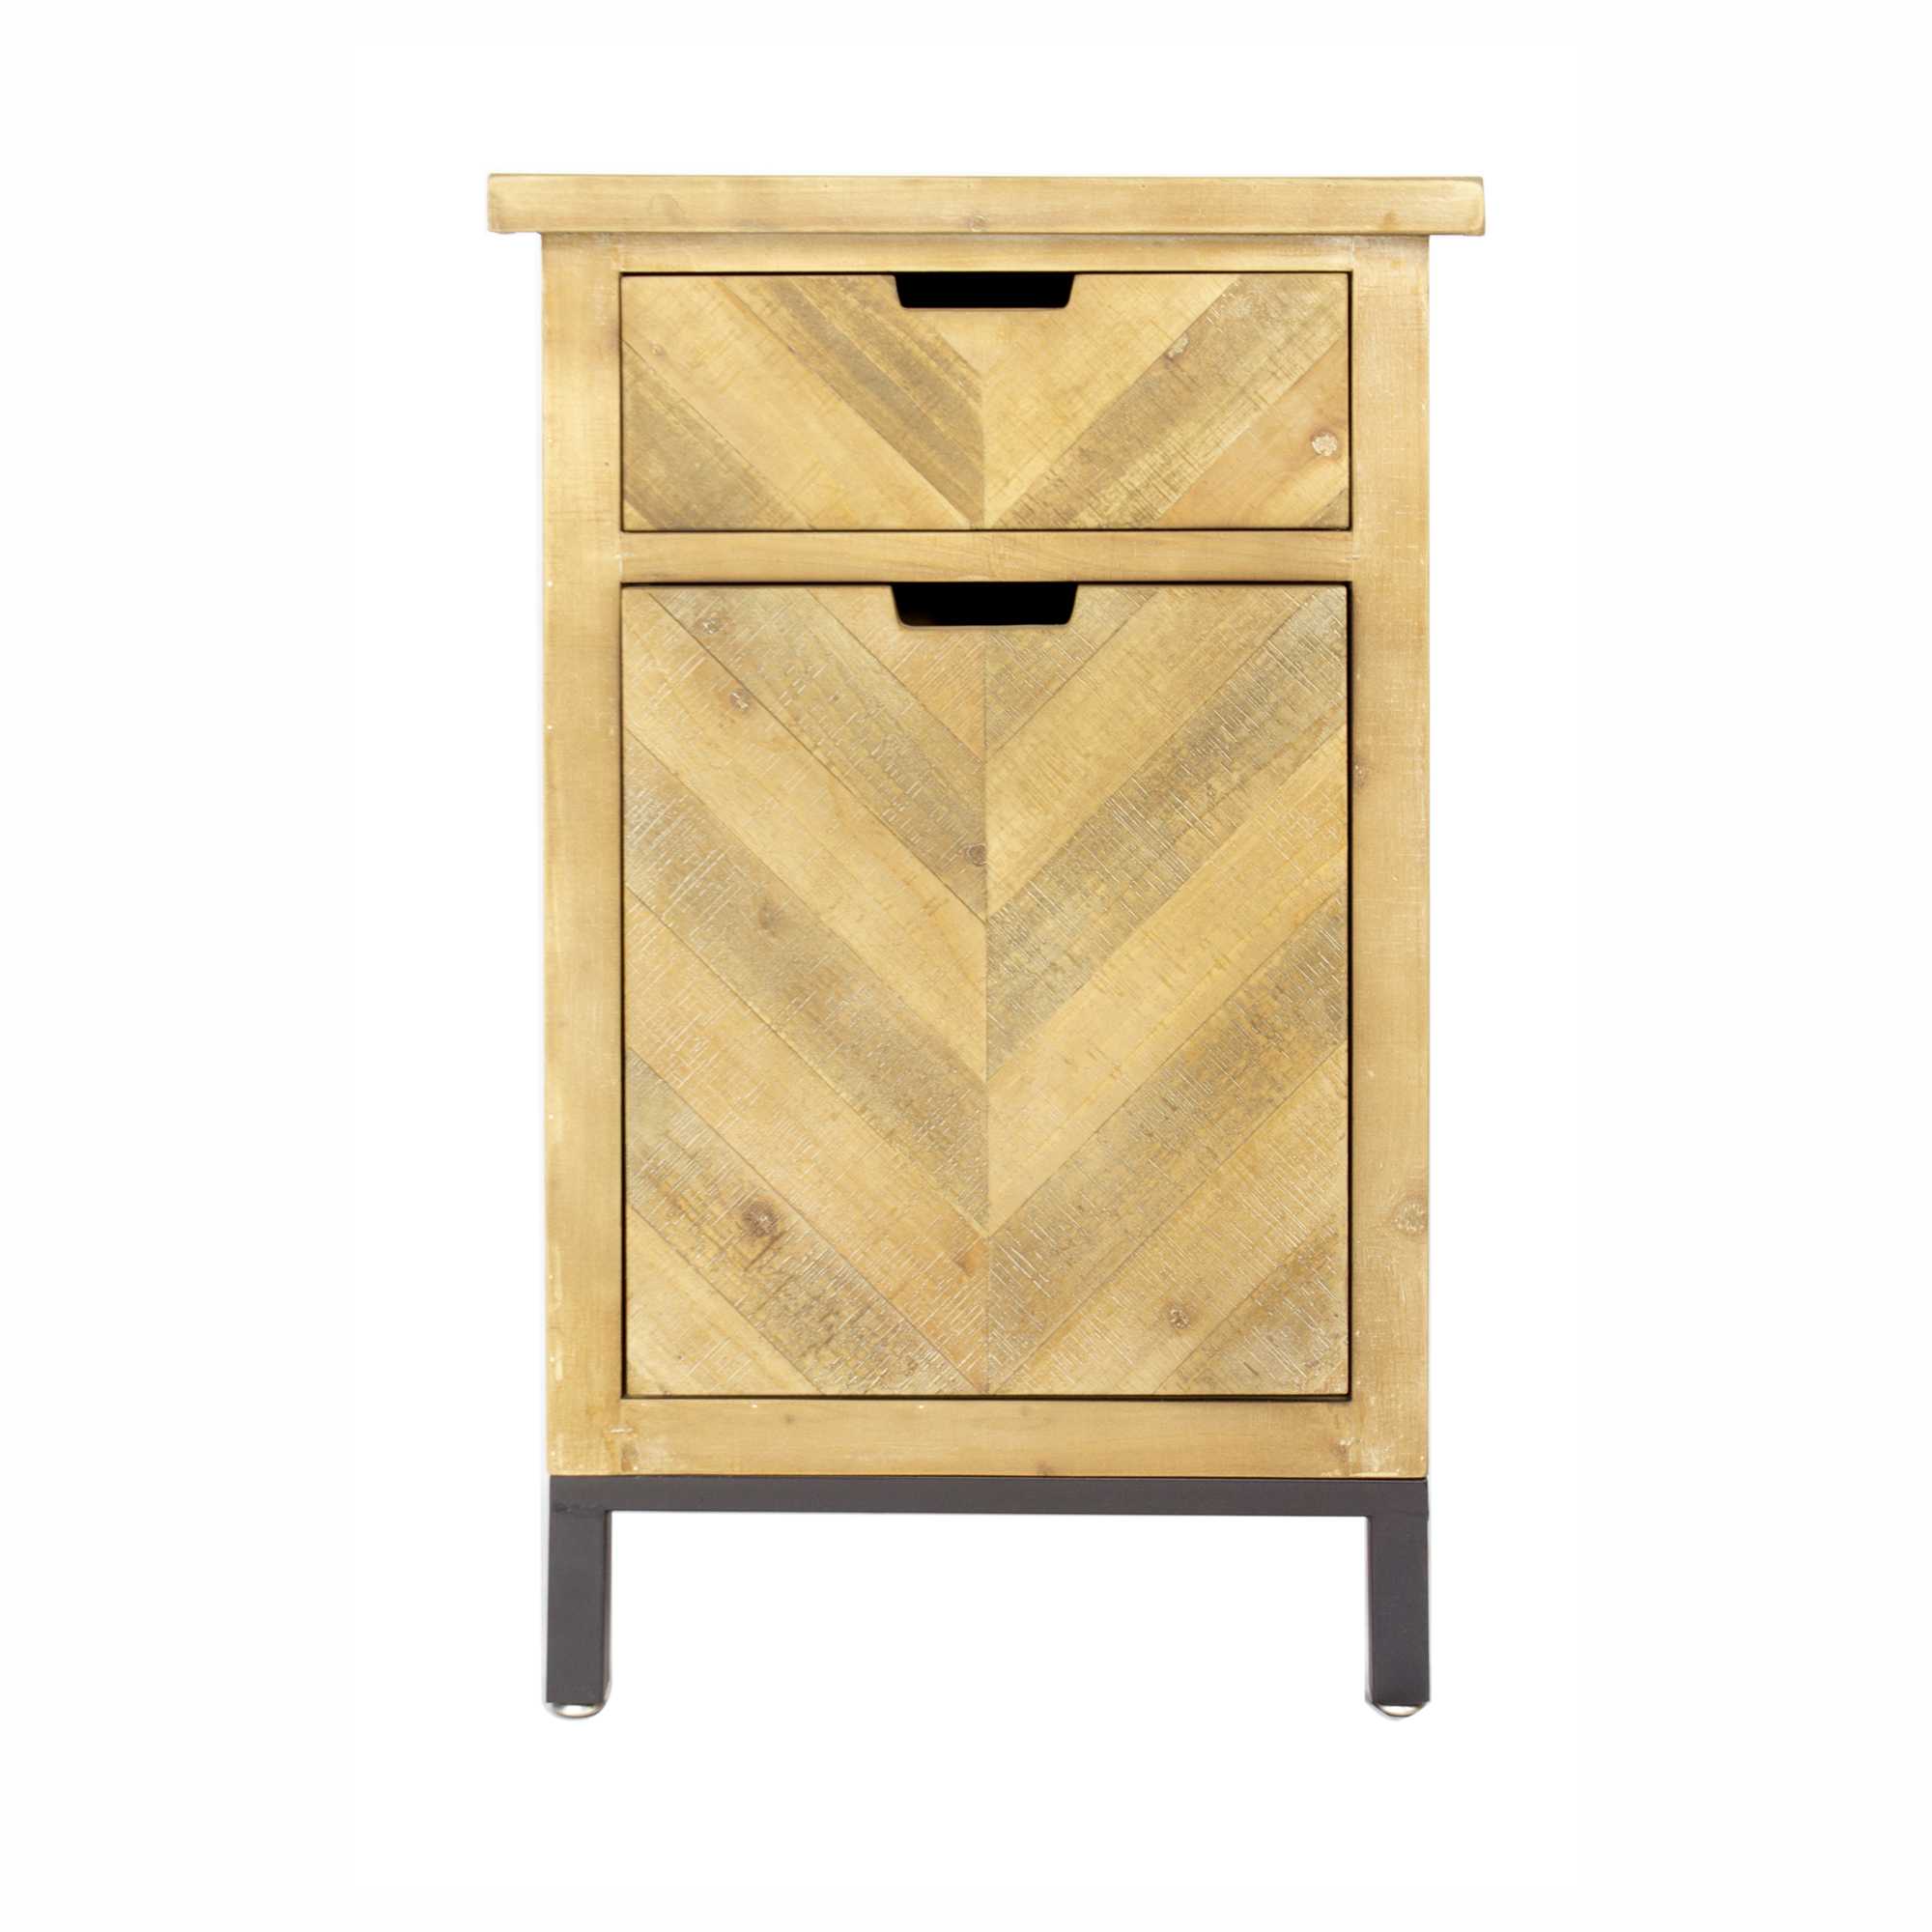 20" X 15" X 31.5" Natural Wood in Iron MDF Cabinet with a Drawer and a Door